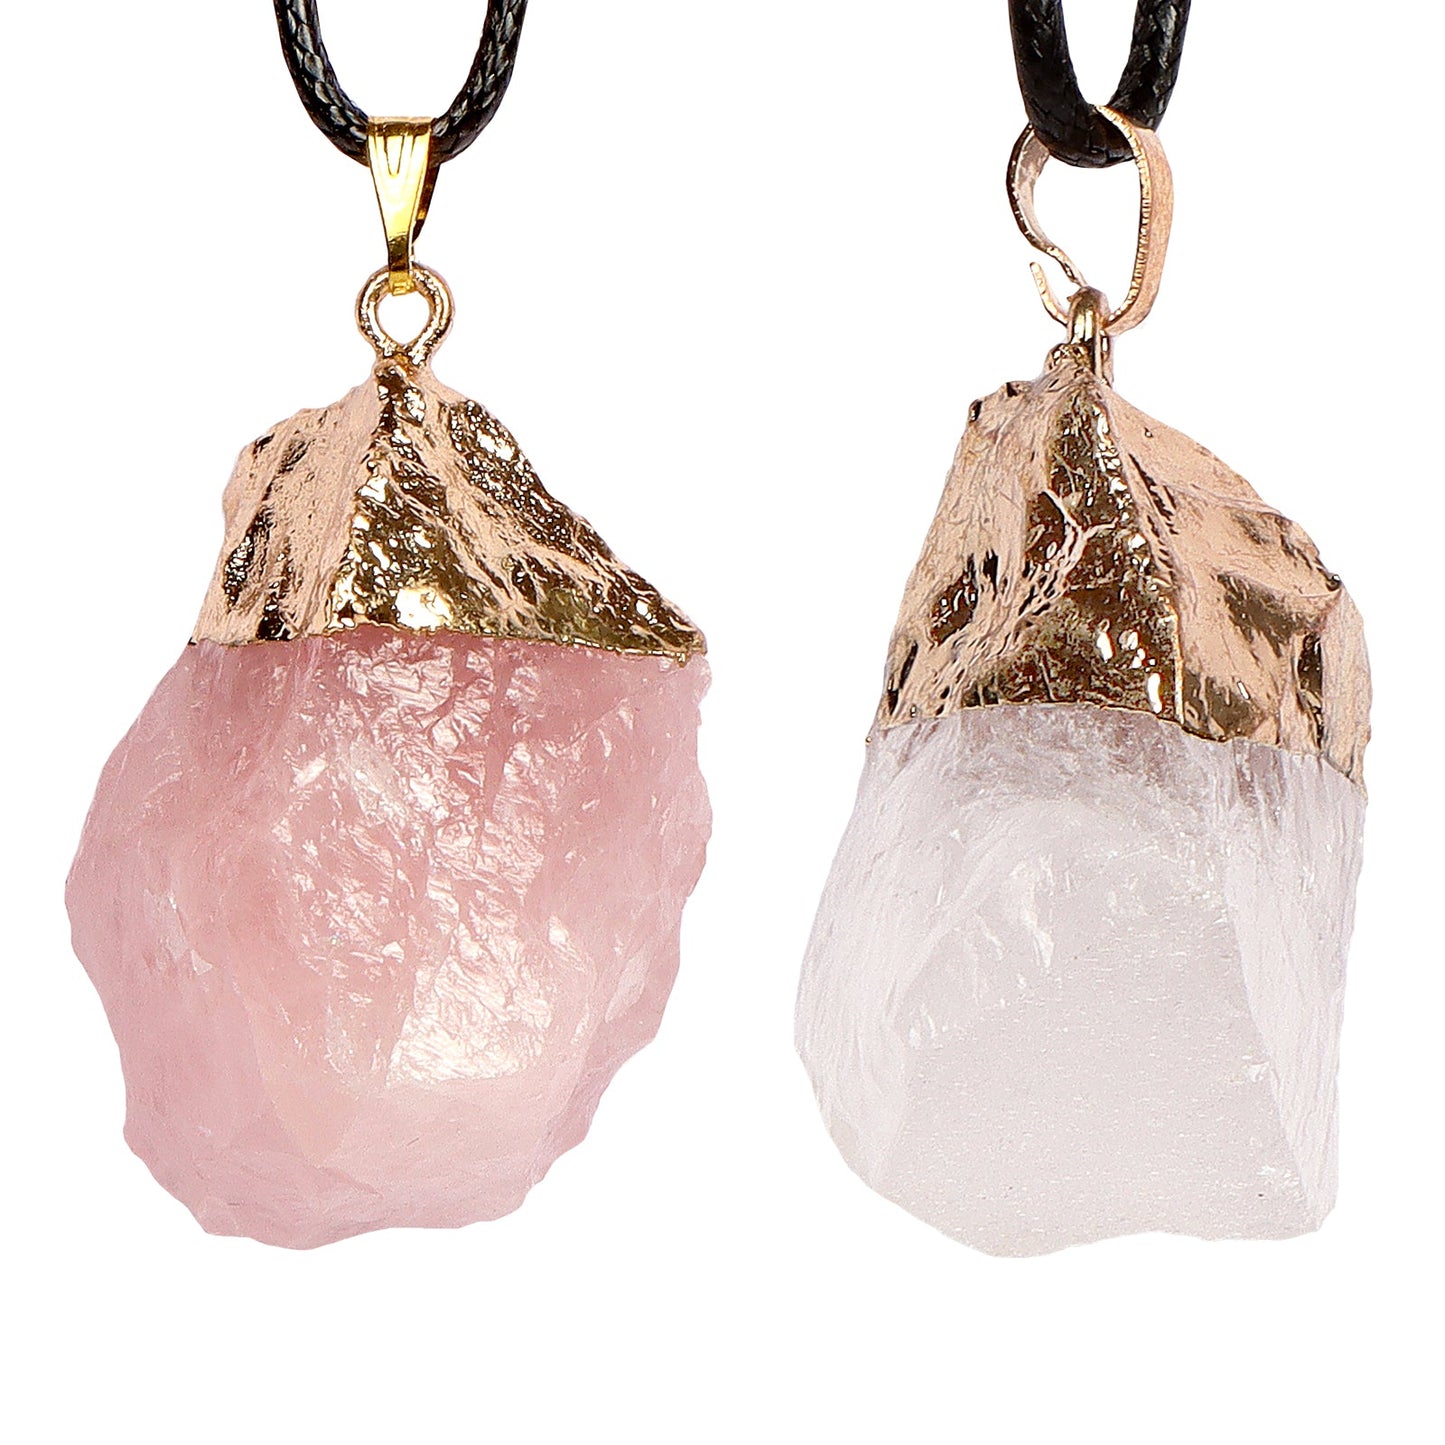 Rose Quartz Crystals Colored Crafts Gemstones Necklace Aoxily CHN, Inc. All Rights Reserved.